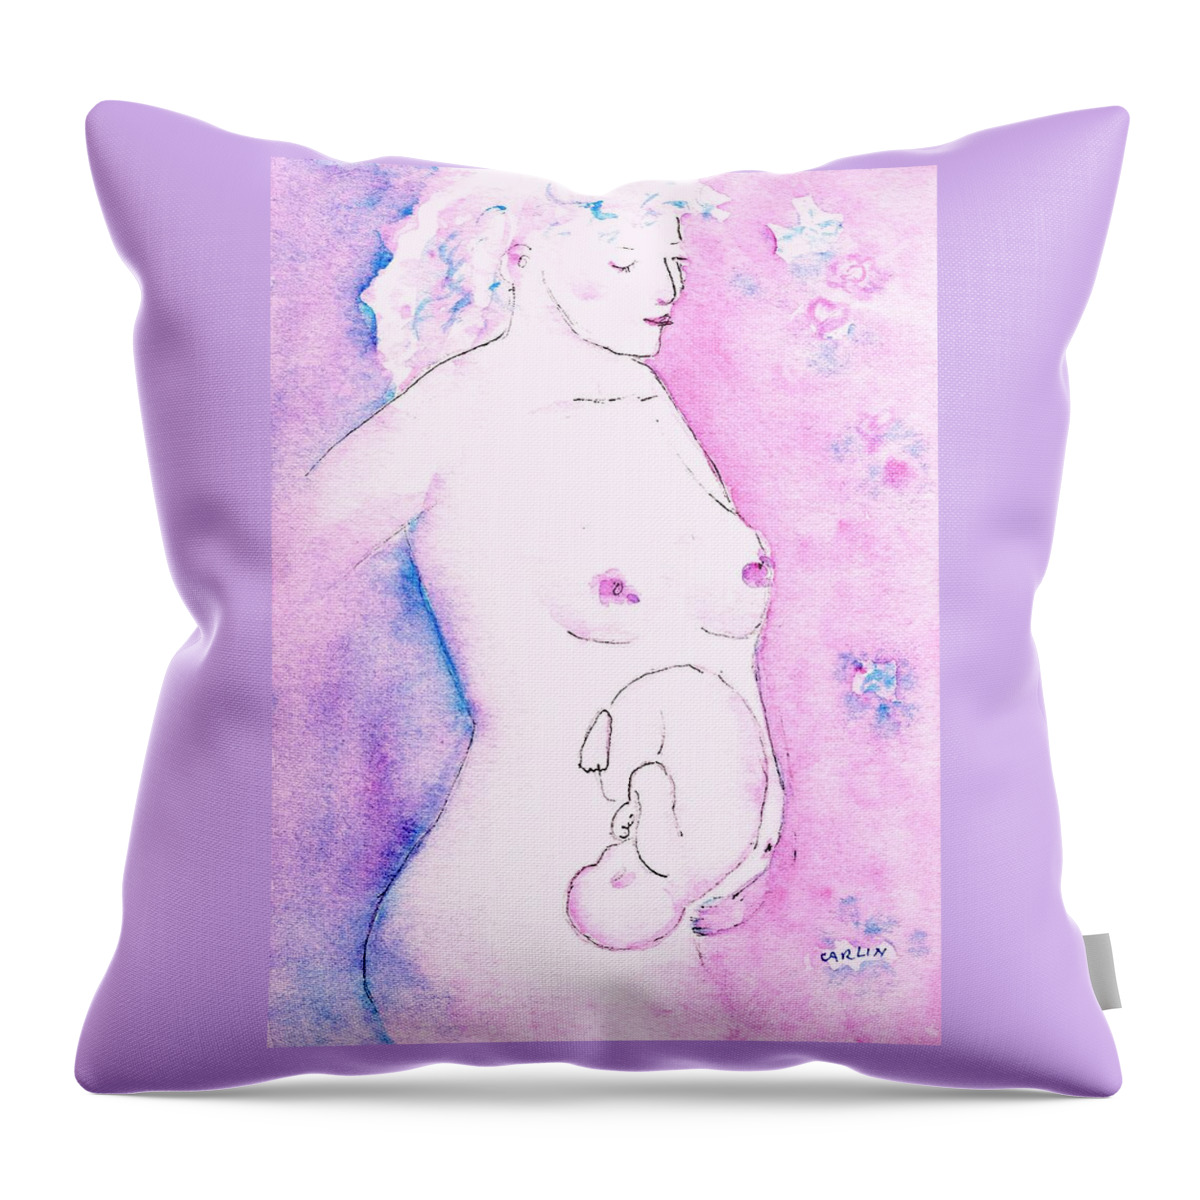 Pregnant Throw Pillow featuring the painting Mother and Fetus Colorful by Carlin Blahnik CarlinArtWatercolor